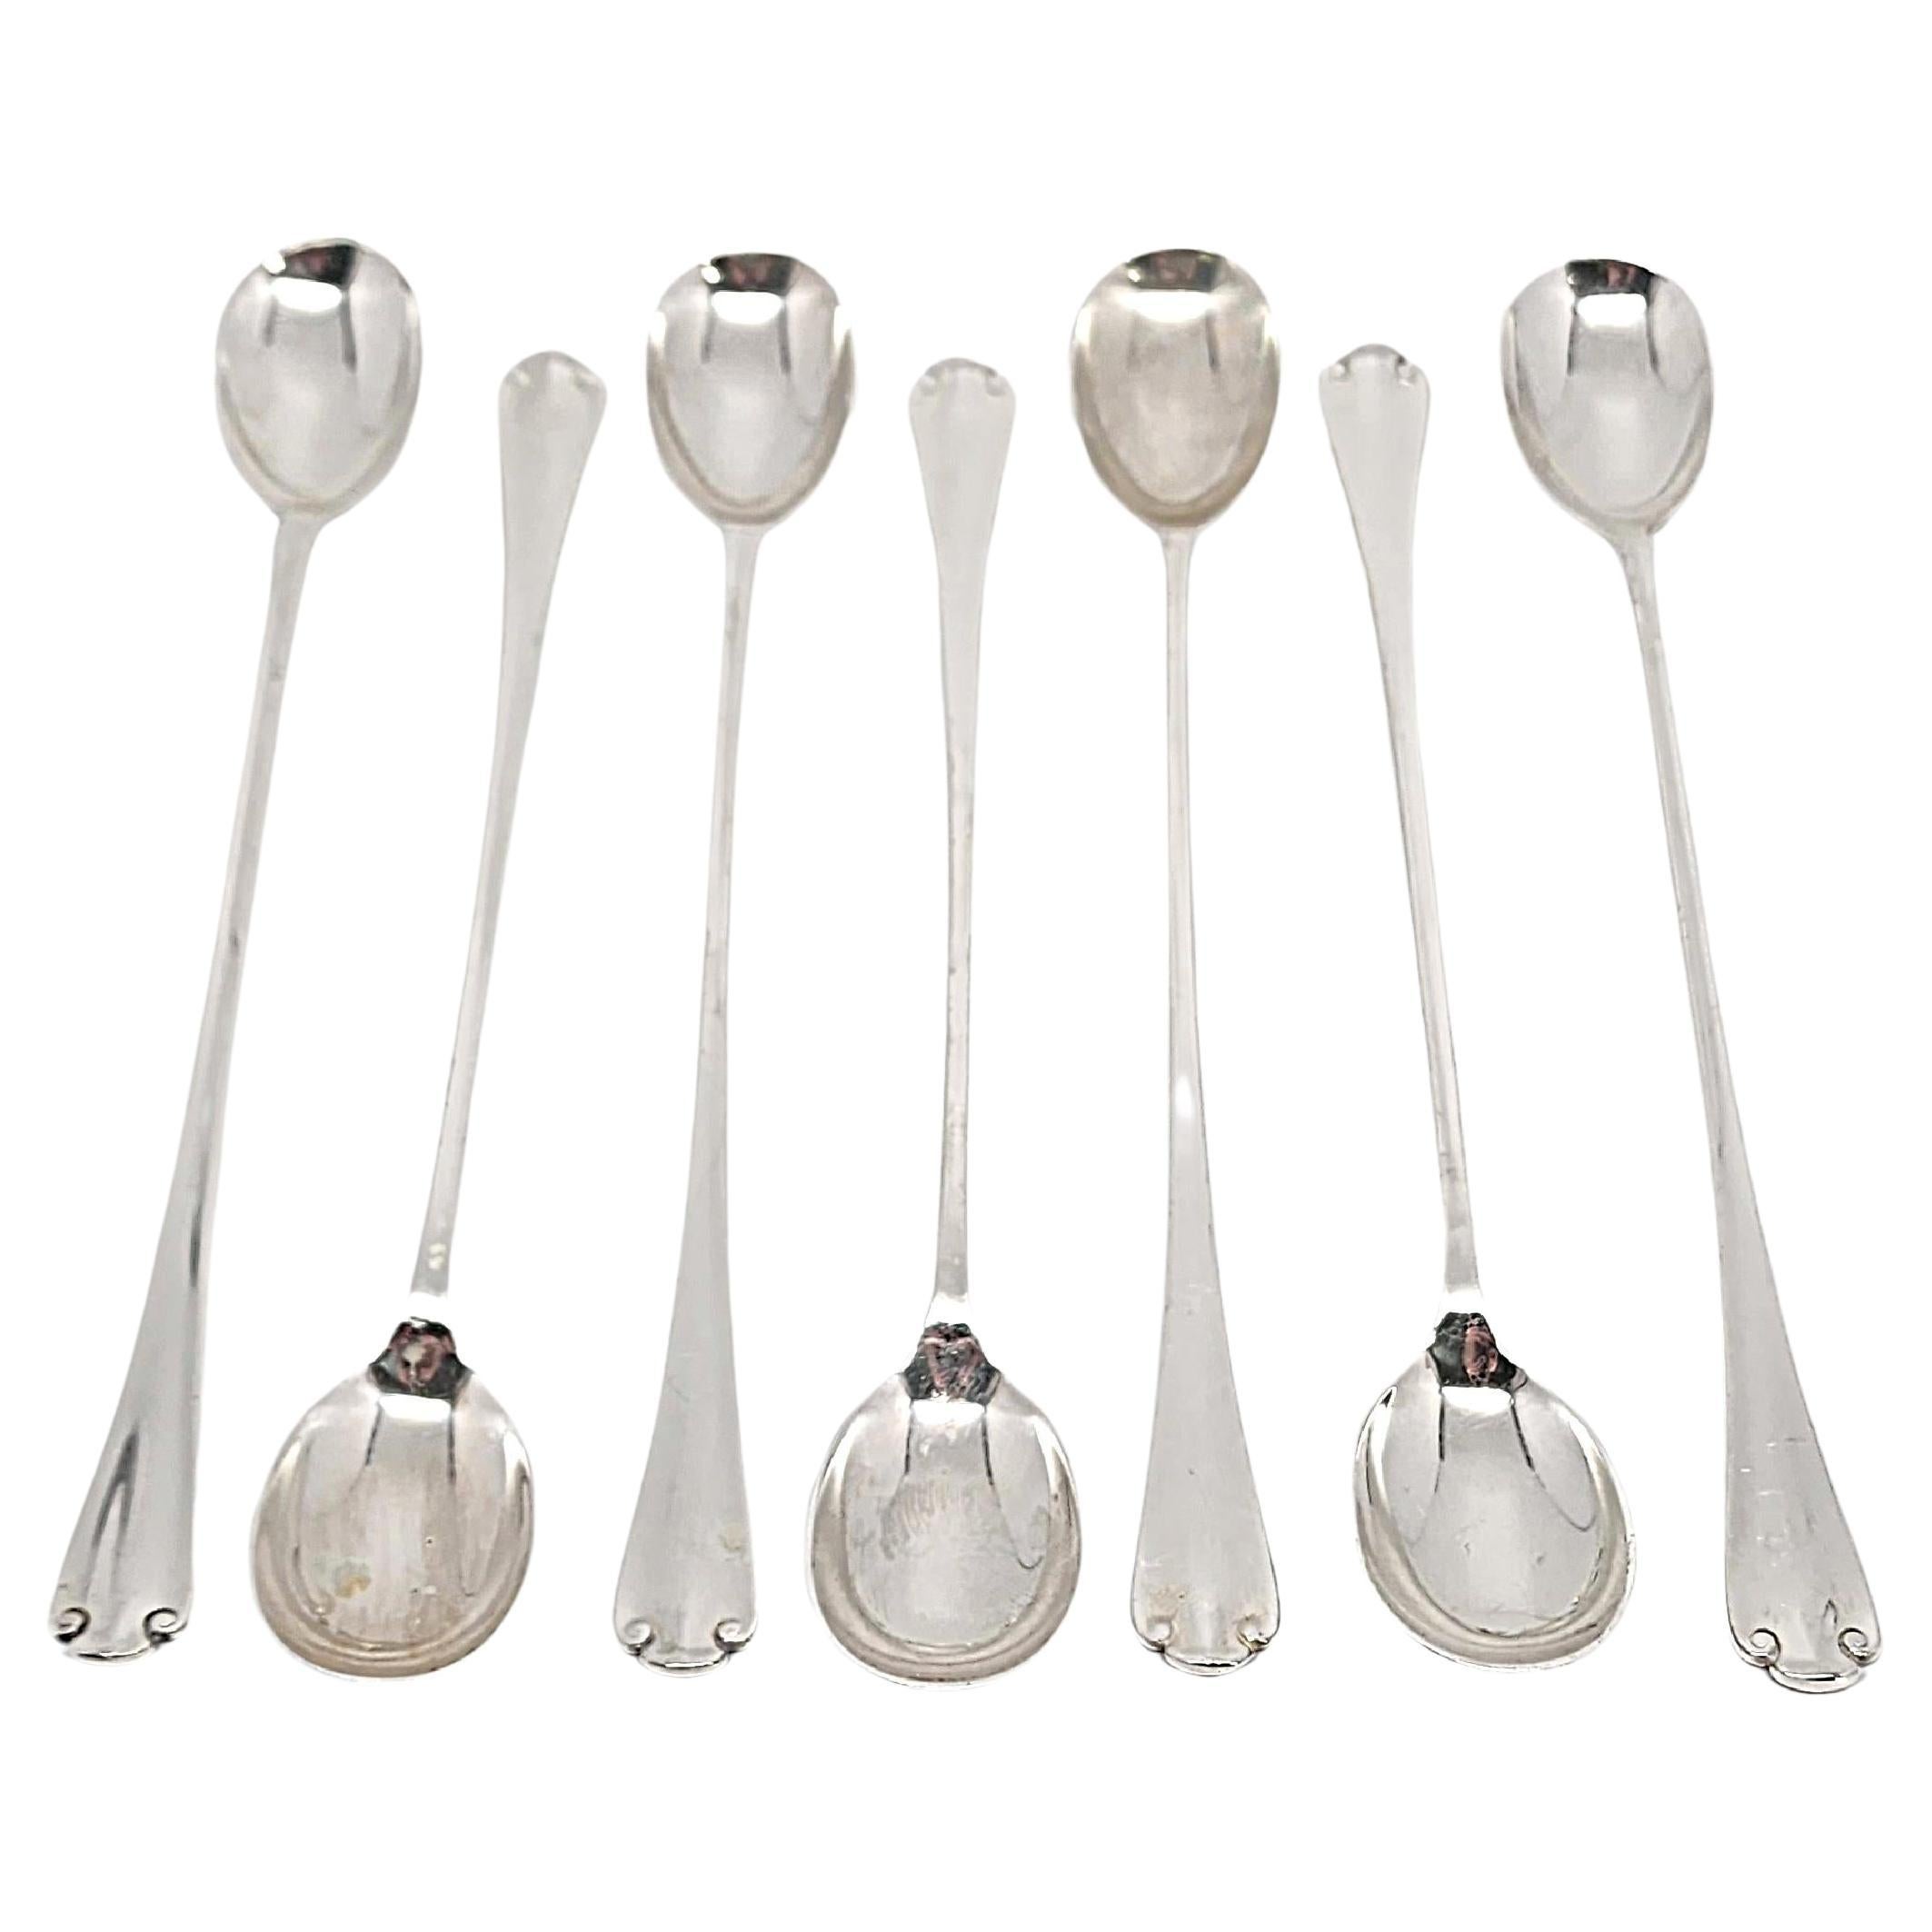 Set of 7 Tiffany & Co Flemish Sterling Silver Iced Tea Spoons 7 3/8" #15480 For Sale